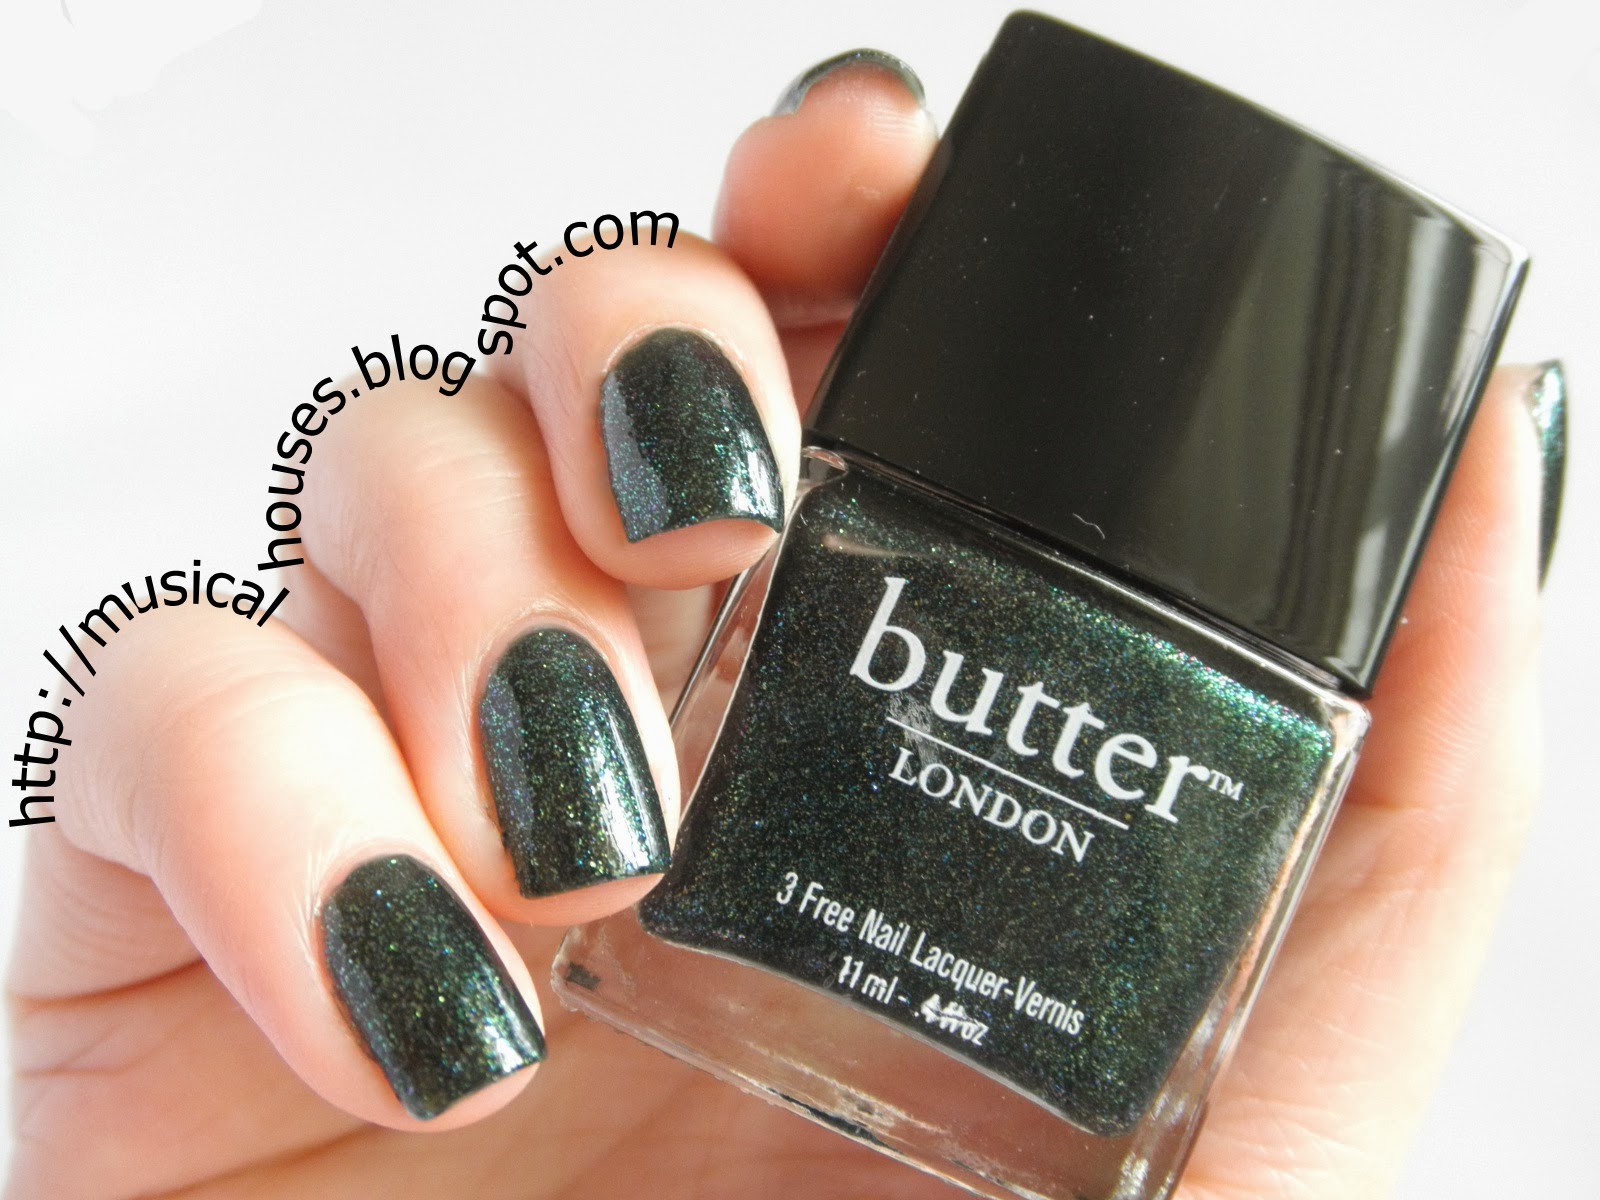 7. Butter London Patent Shine 10X Nail Lacquer in "Different Color" - wide 5